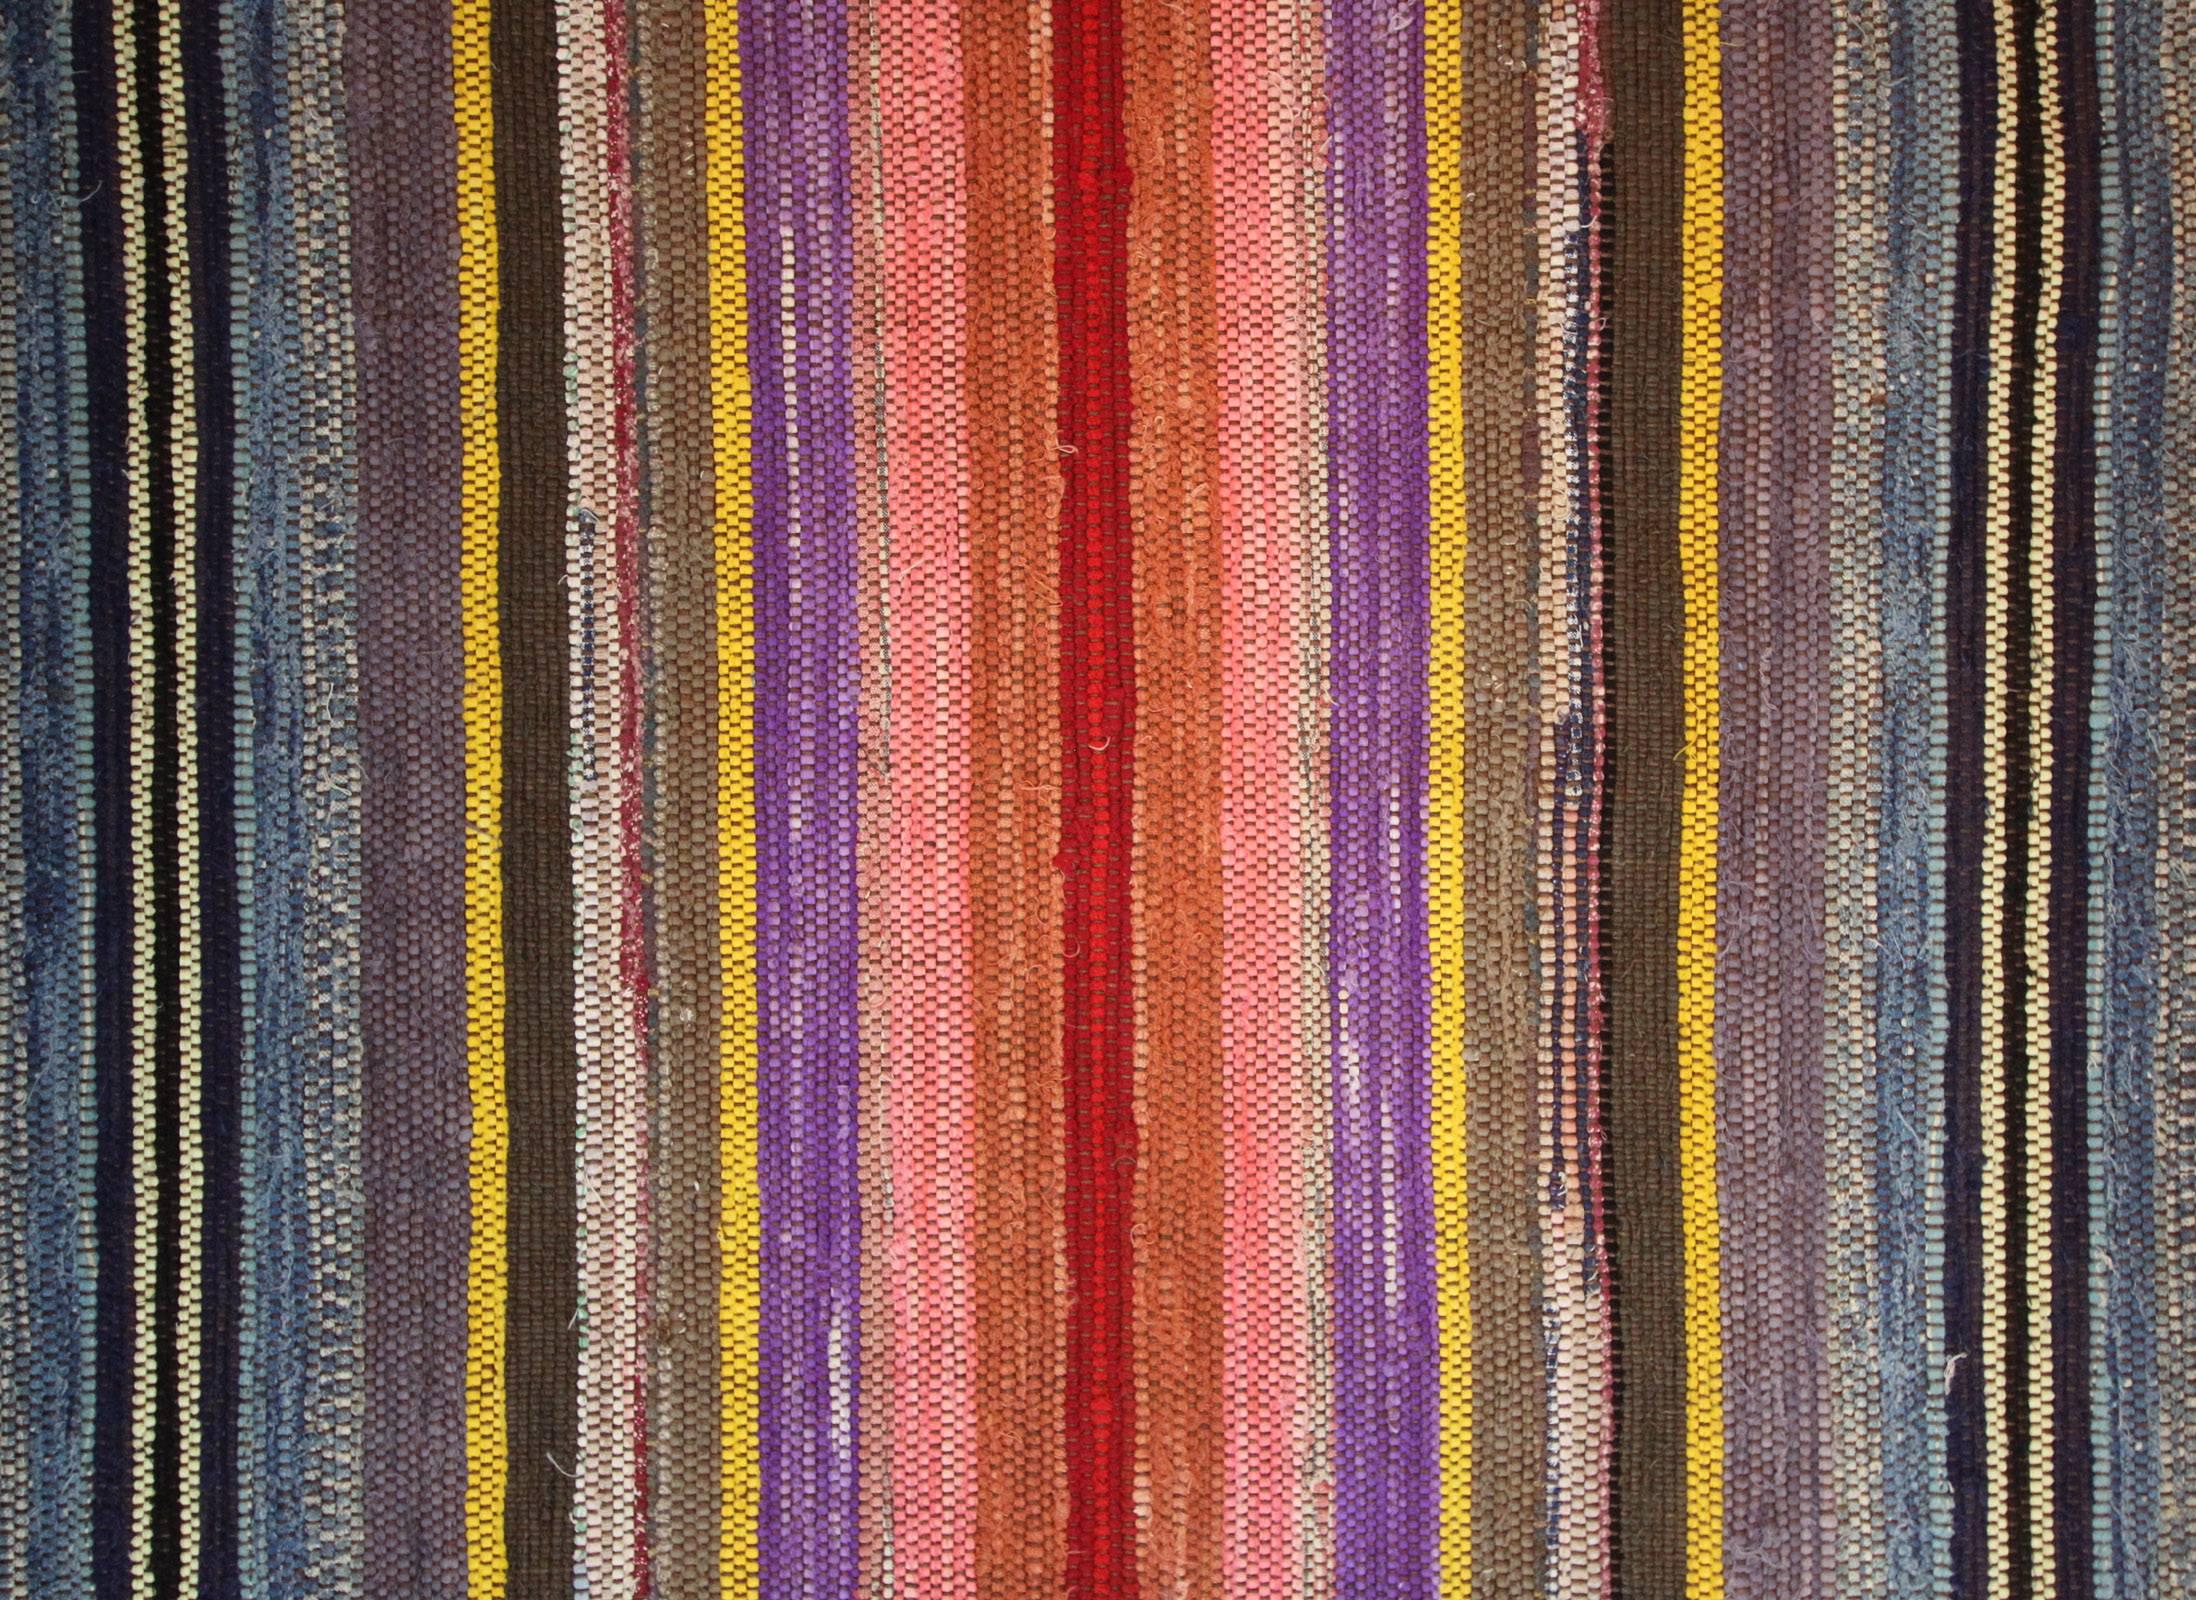 Country Roll of Woven Carpet, American, Early 20th Century